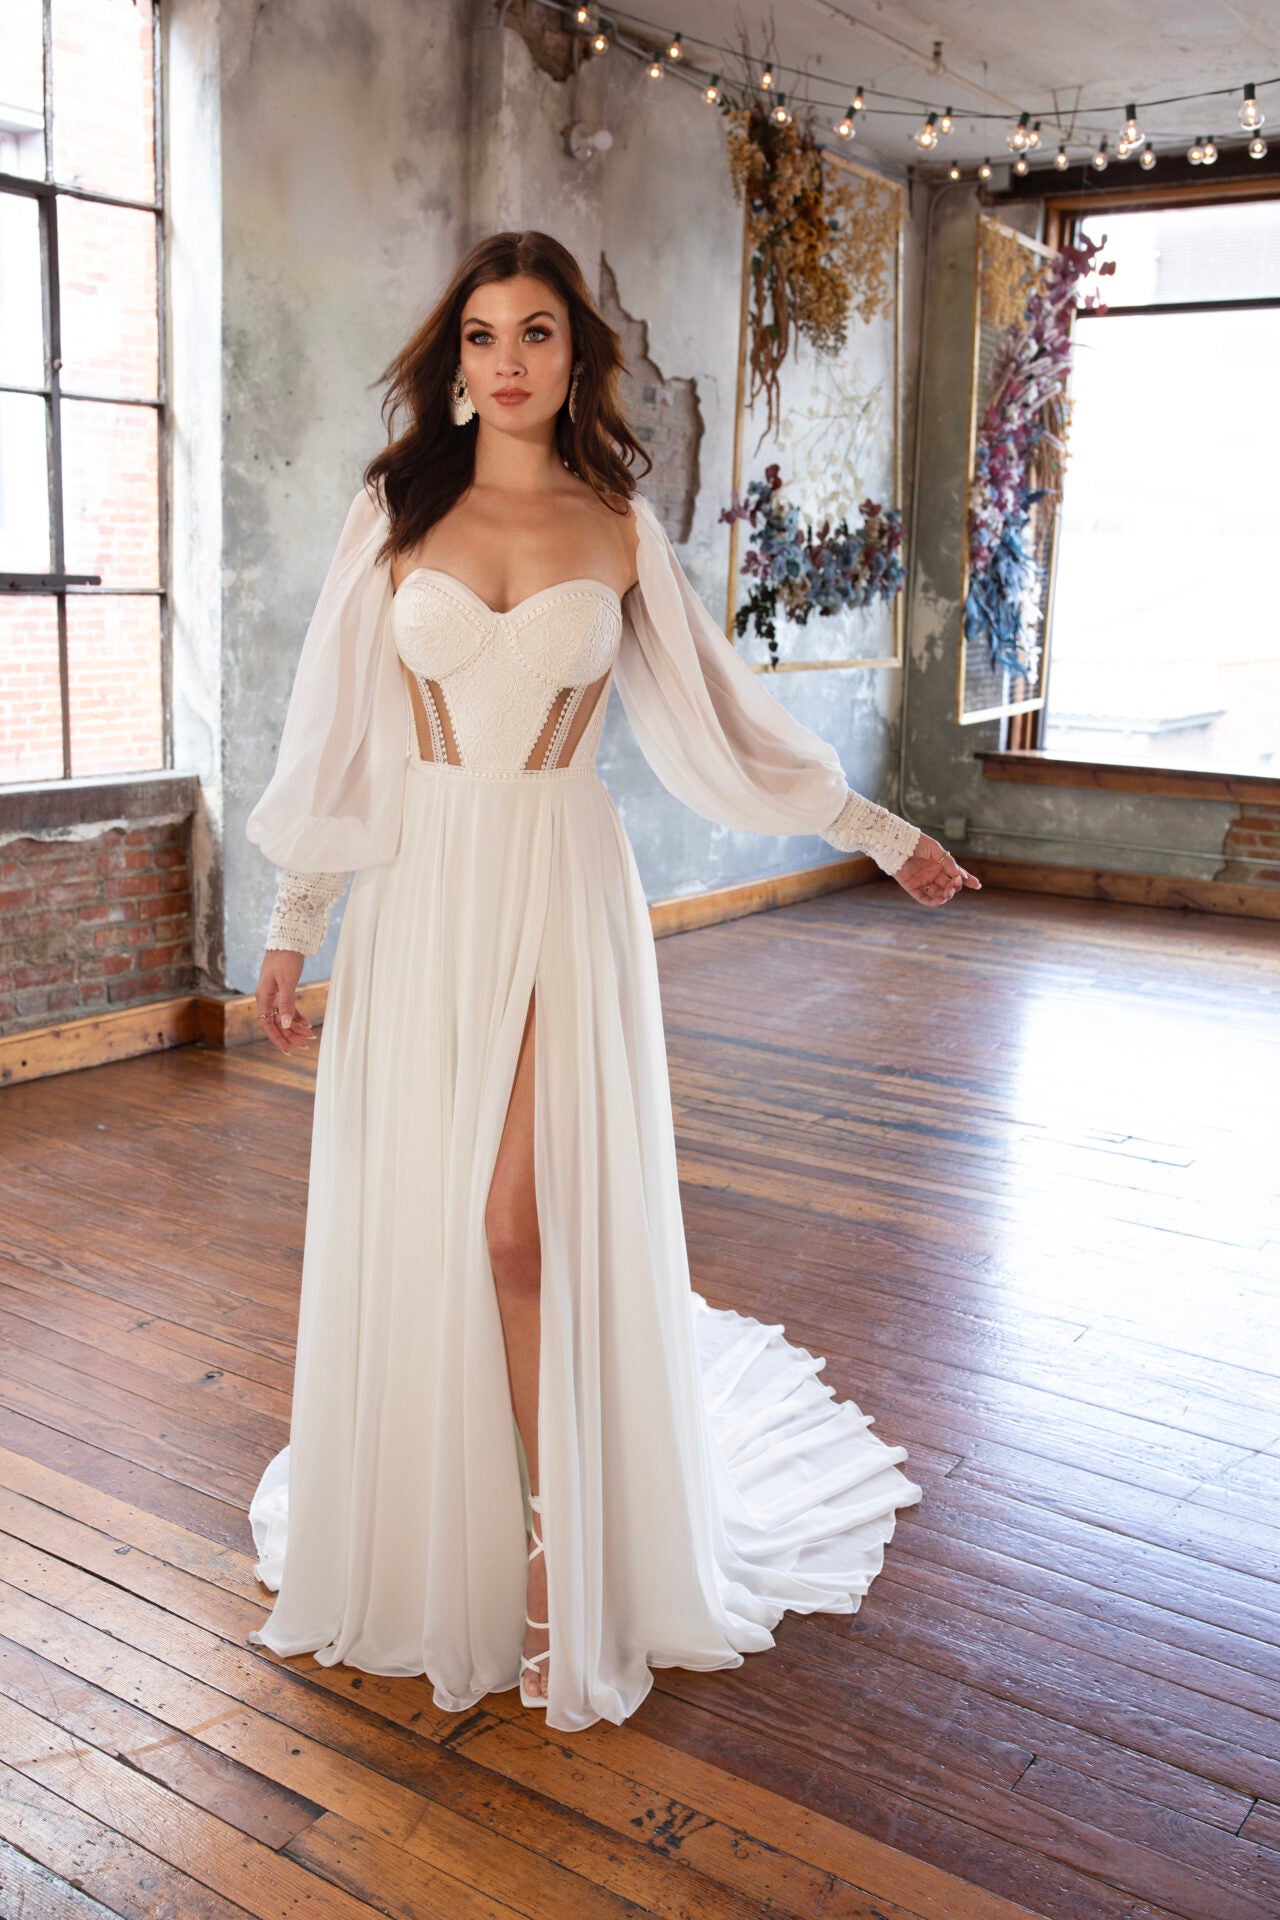 Strapless A-line Wedding Dress With Detachable Long Sleeves by All Who Wander - Image 1